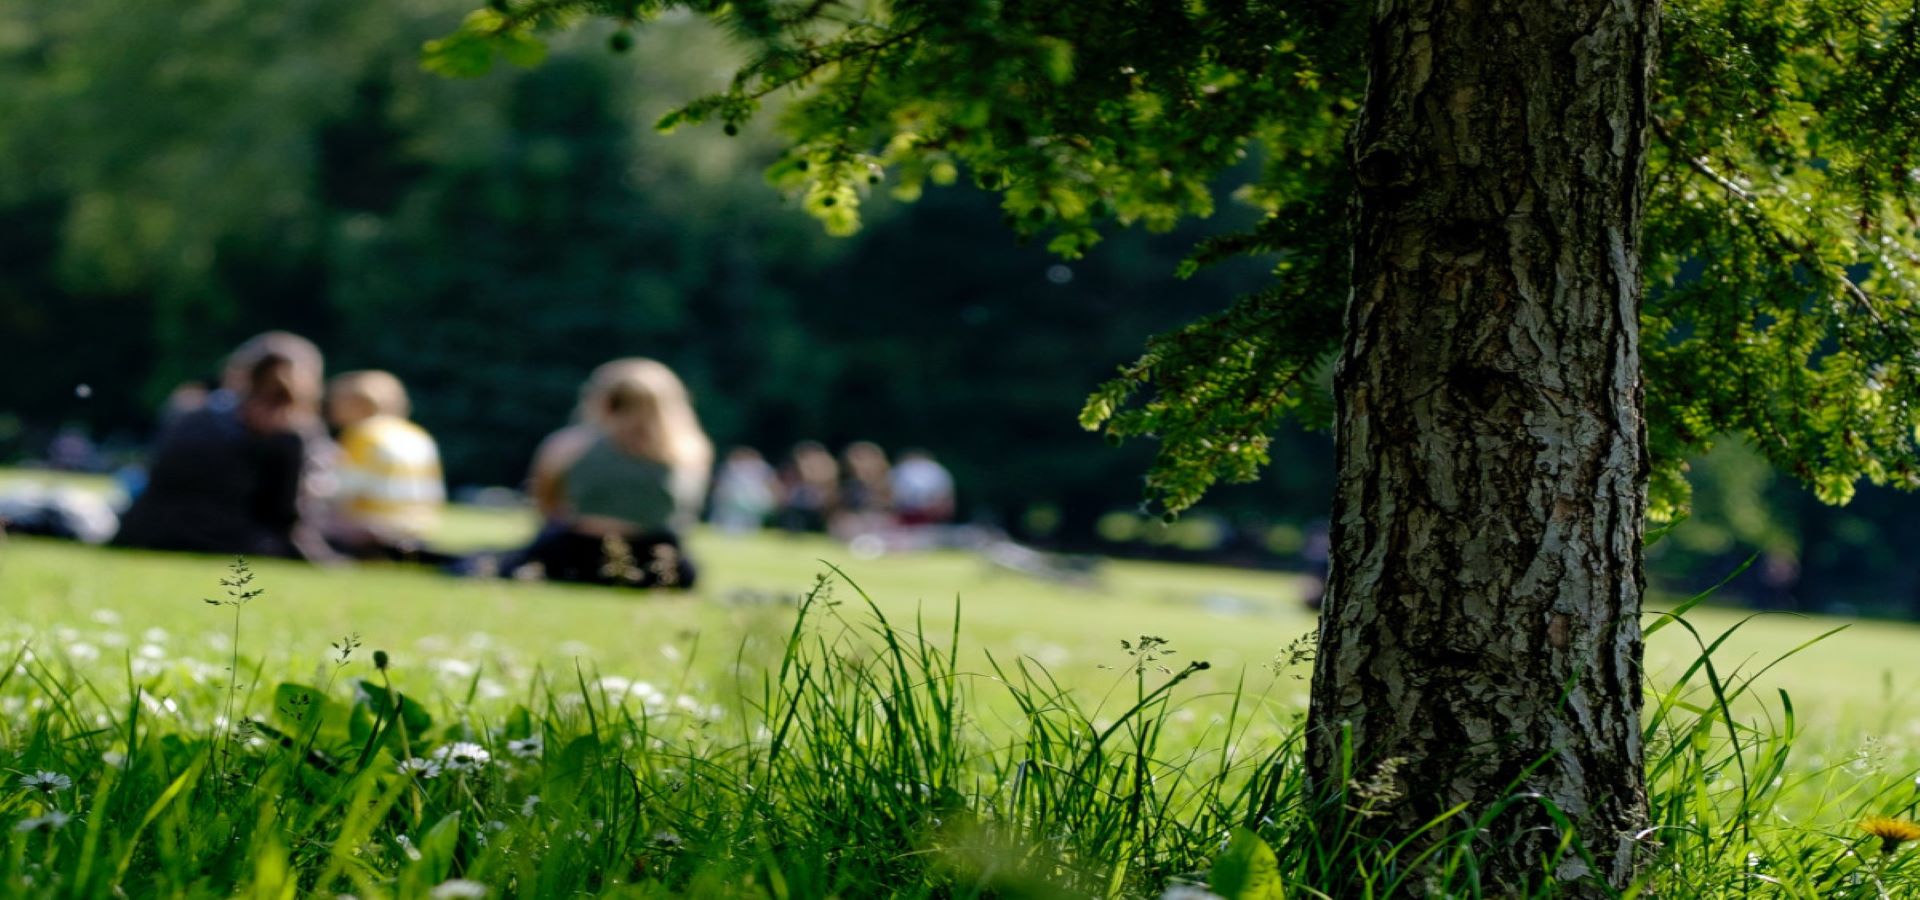 Children with greater proximity to green spaces have less asthma and allergic diseases